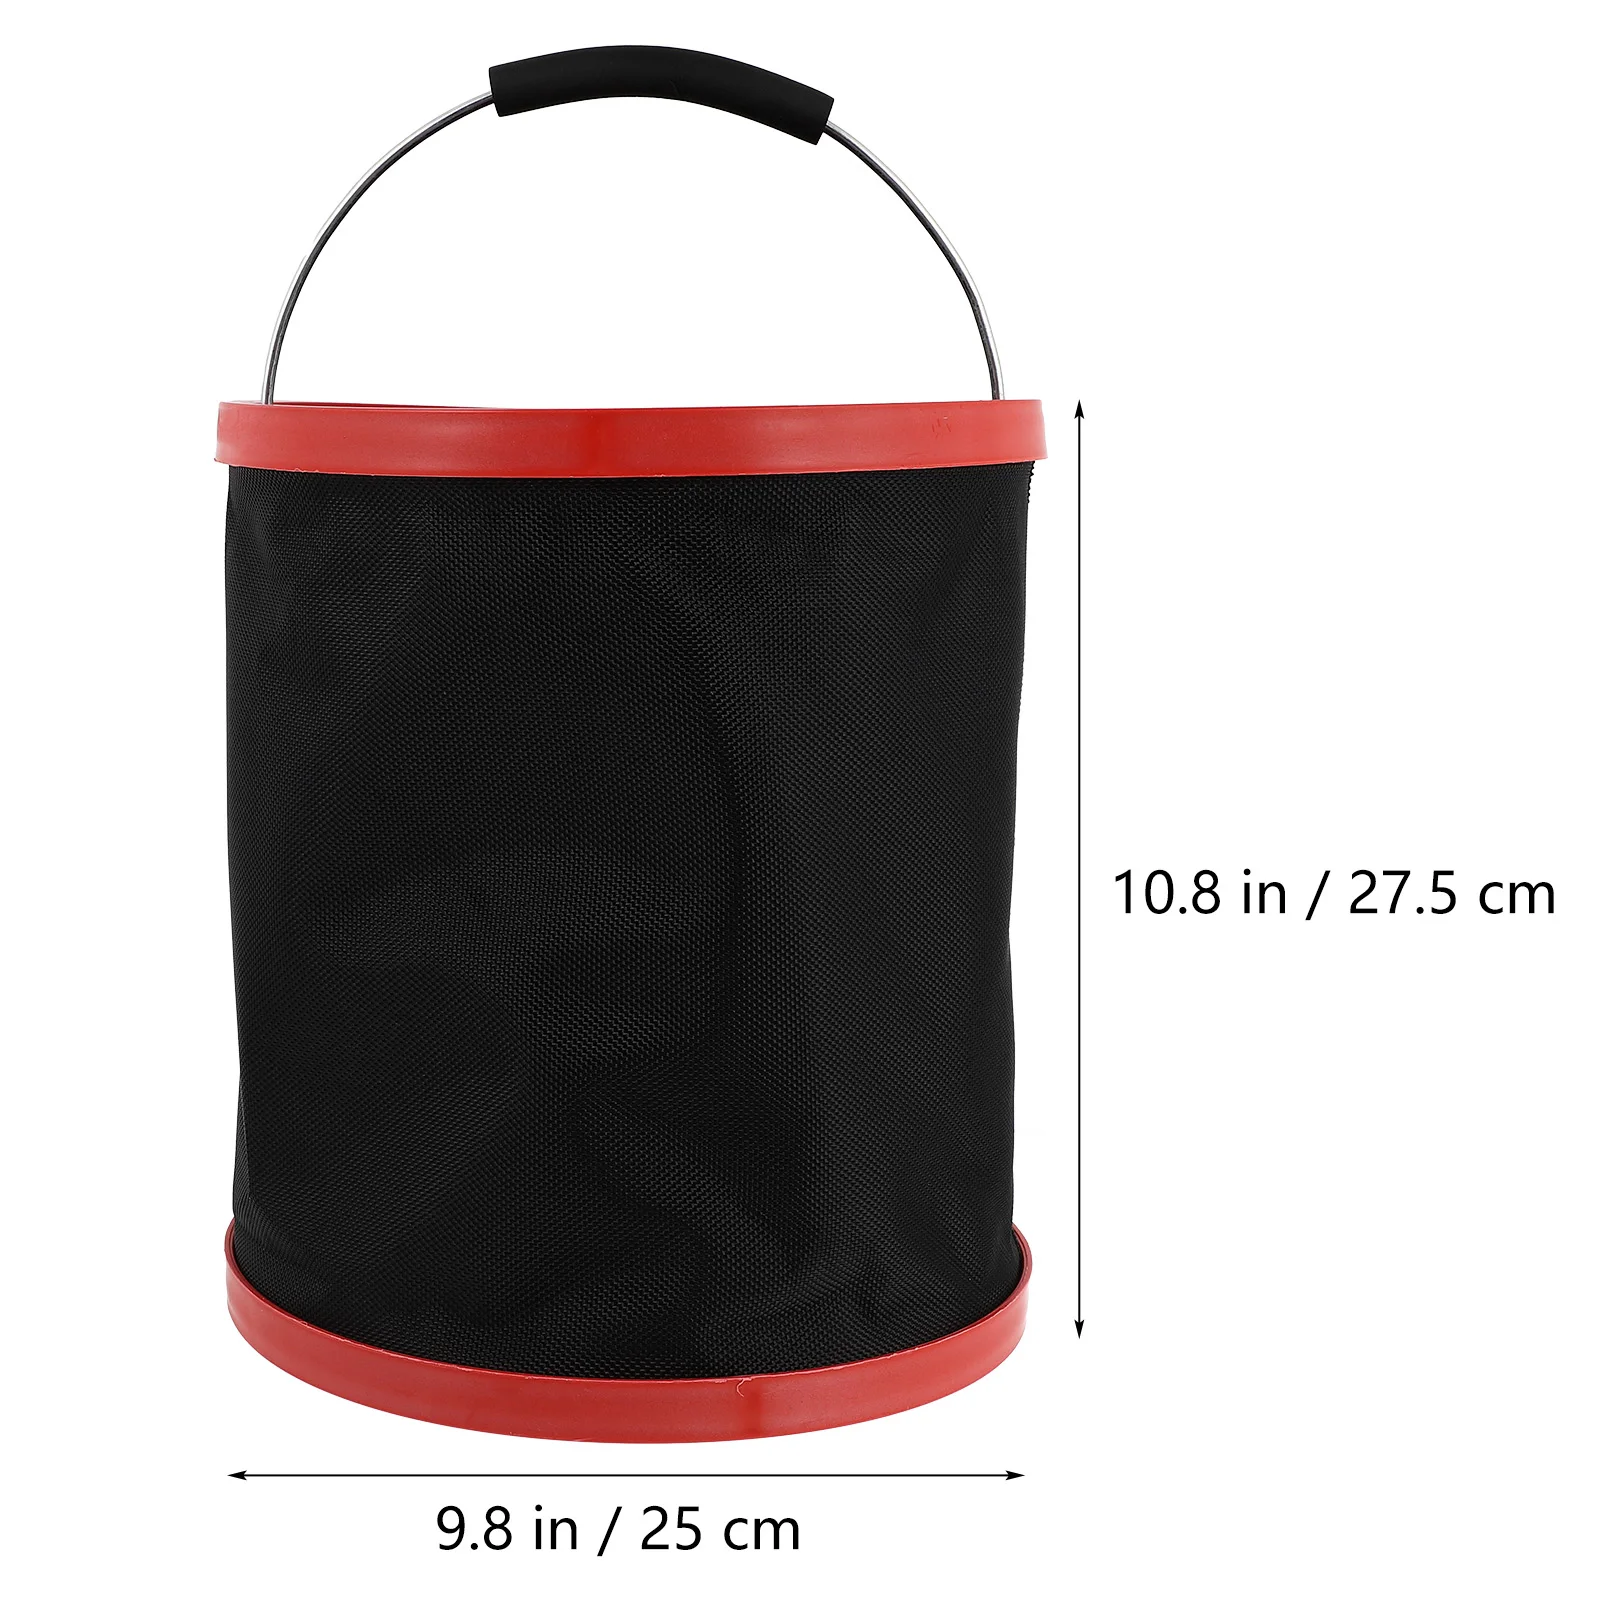 

12L Waterproof Folding Bucket Collapsible Hydration Packs Water Bucket Bags Container Canvas Bucket Outdoor Barrel Car Storage